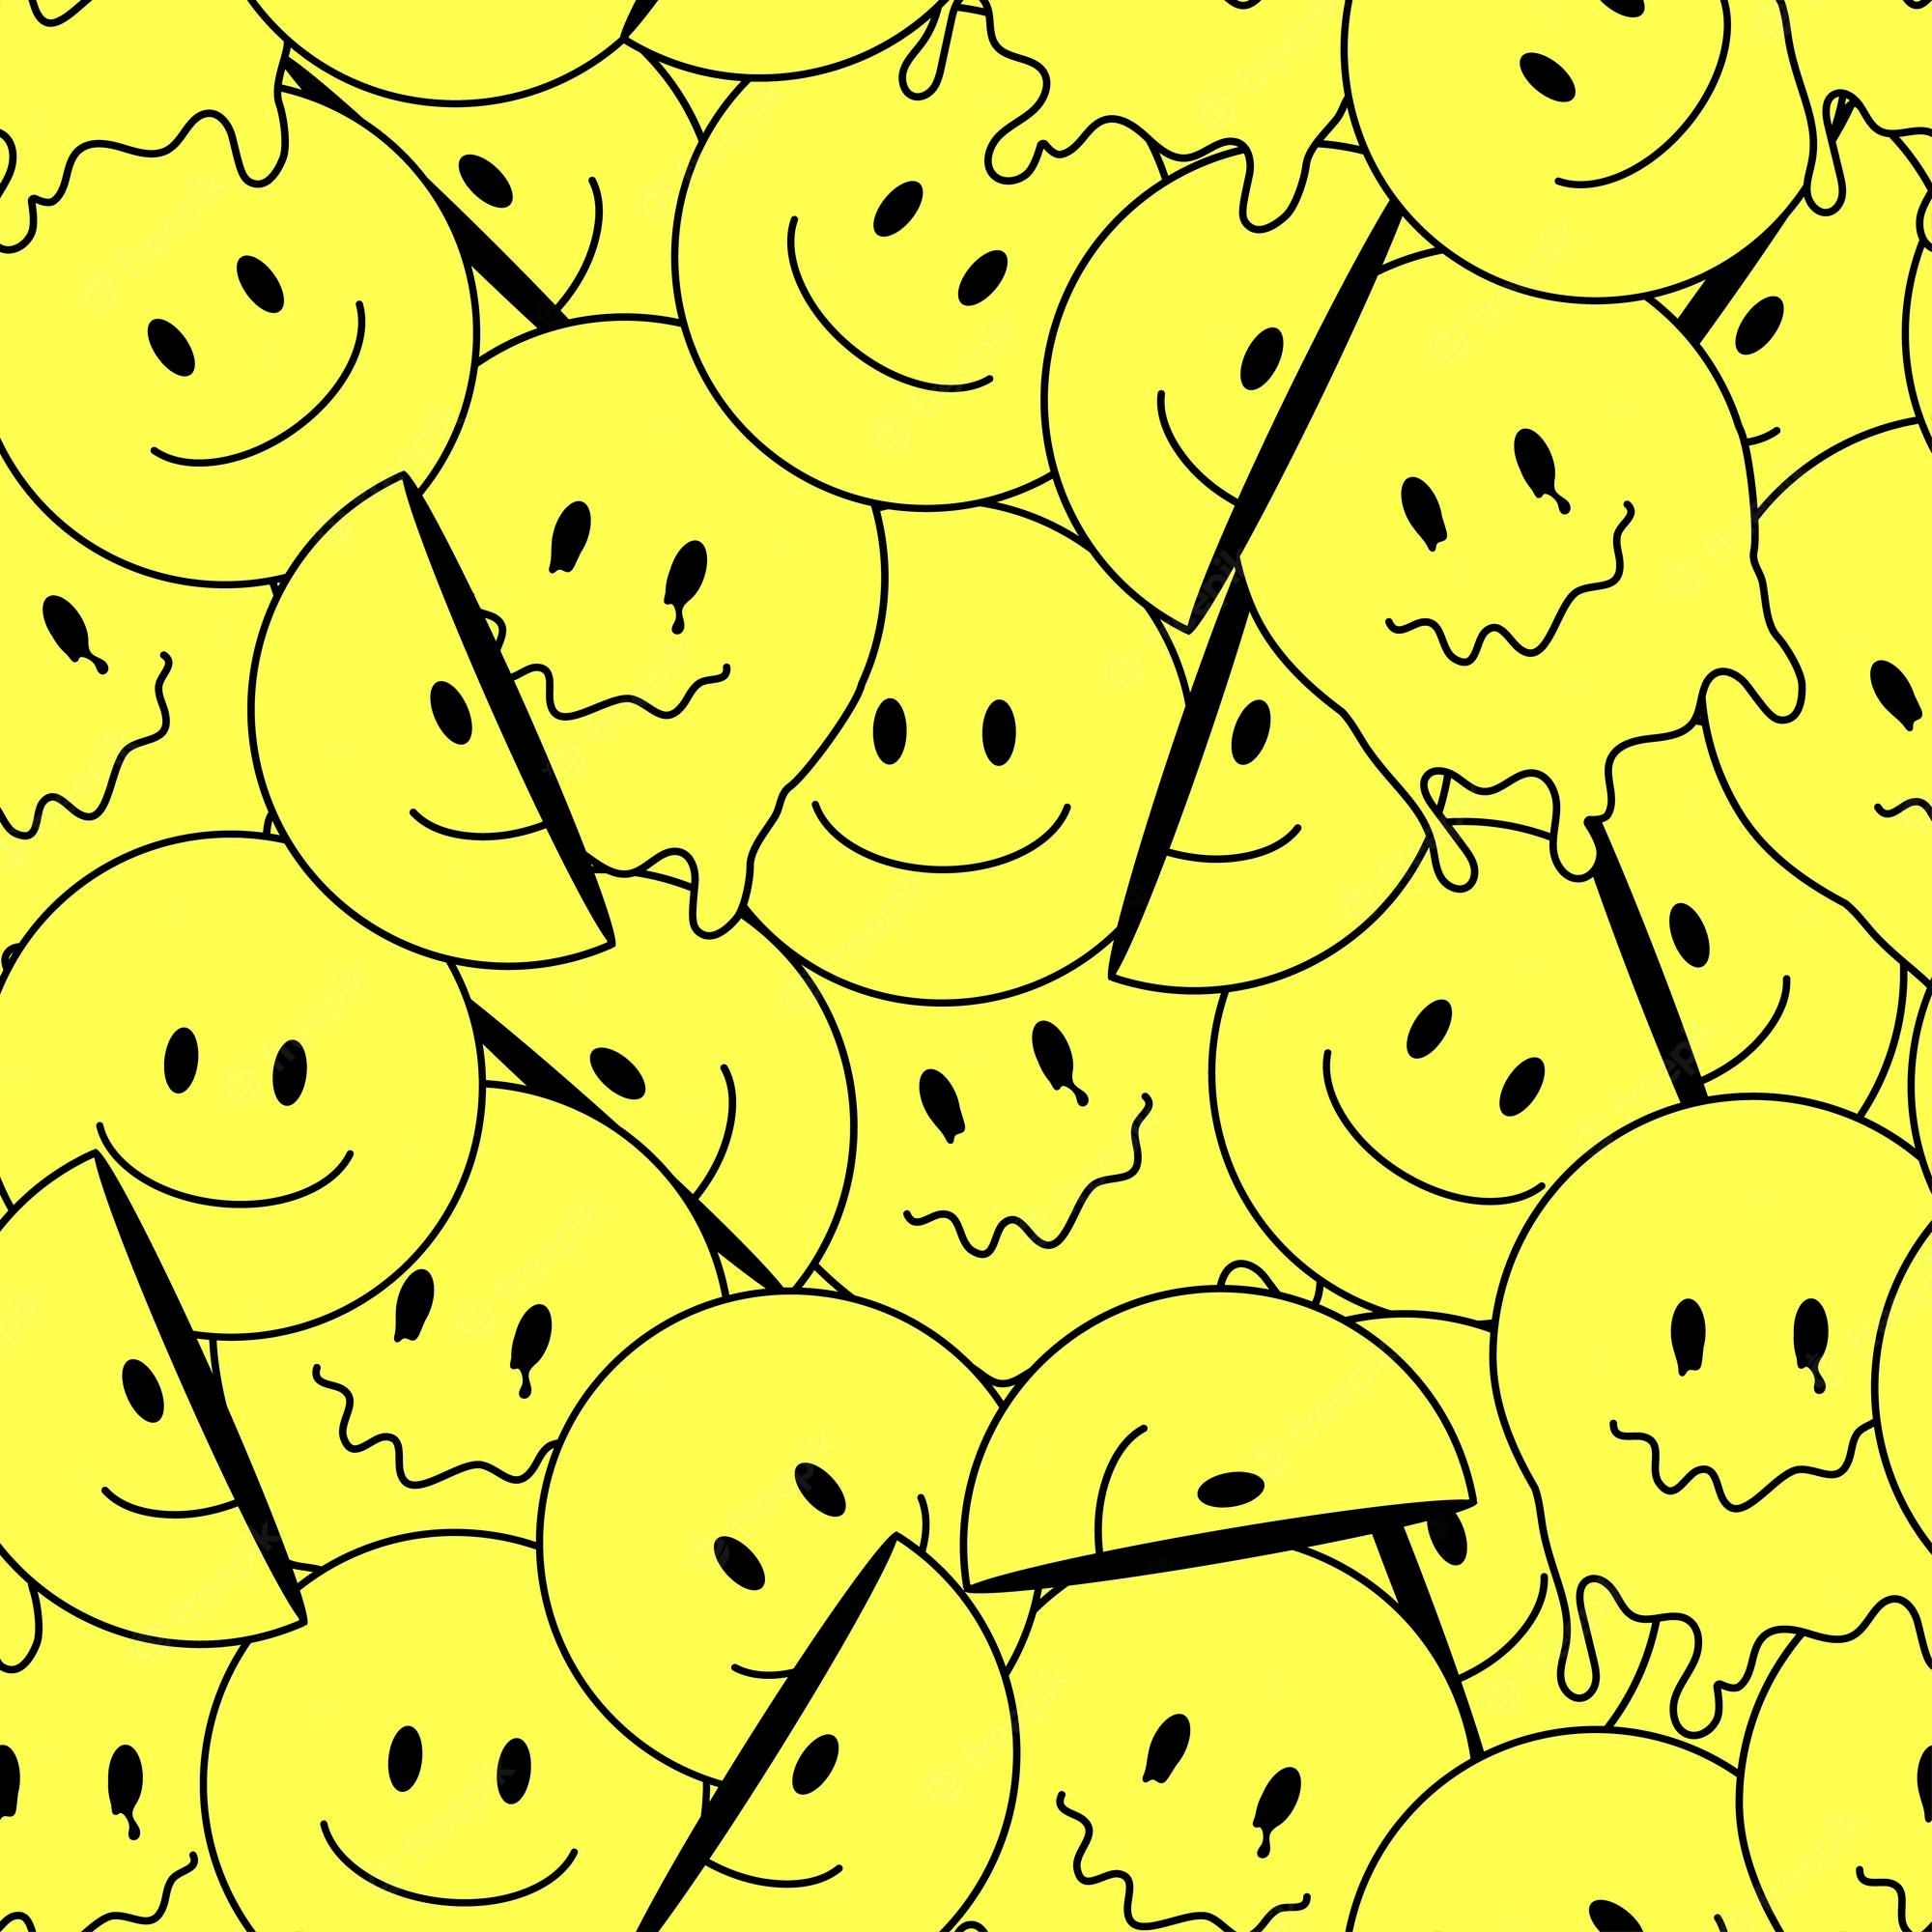 A pattern of smiley faces, some with black tears, on a yellow background - Y2K